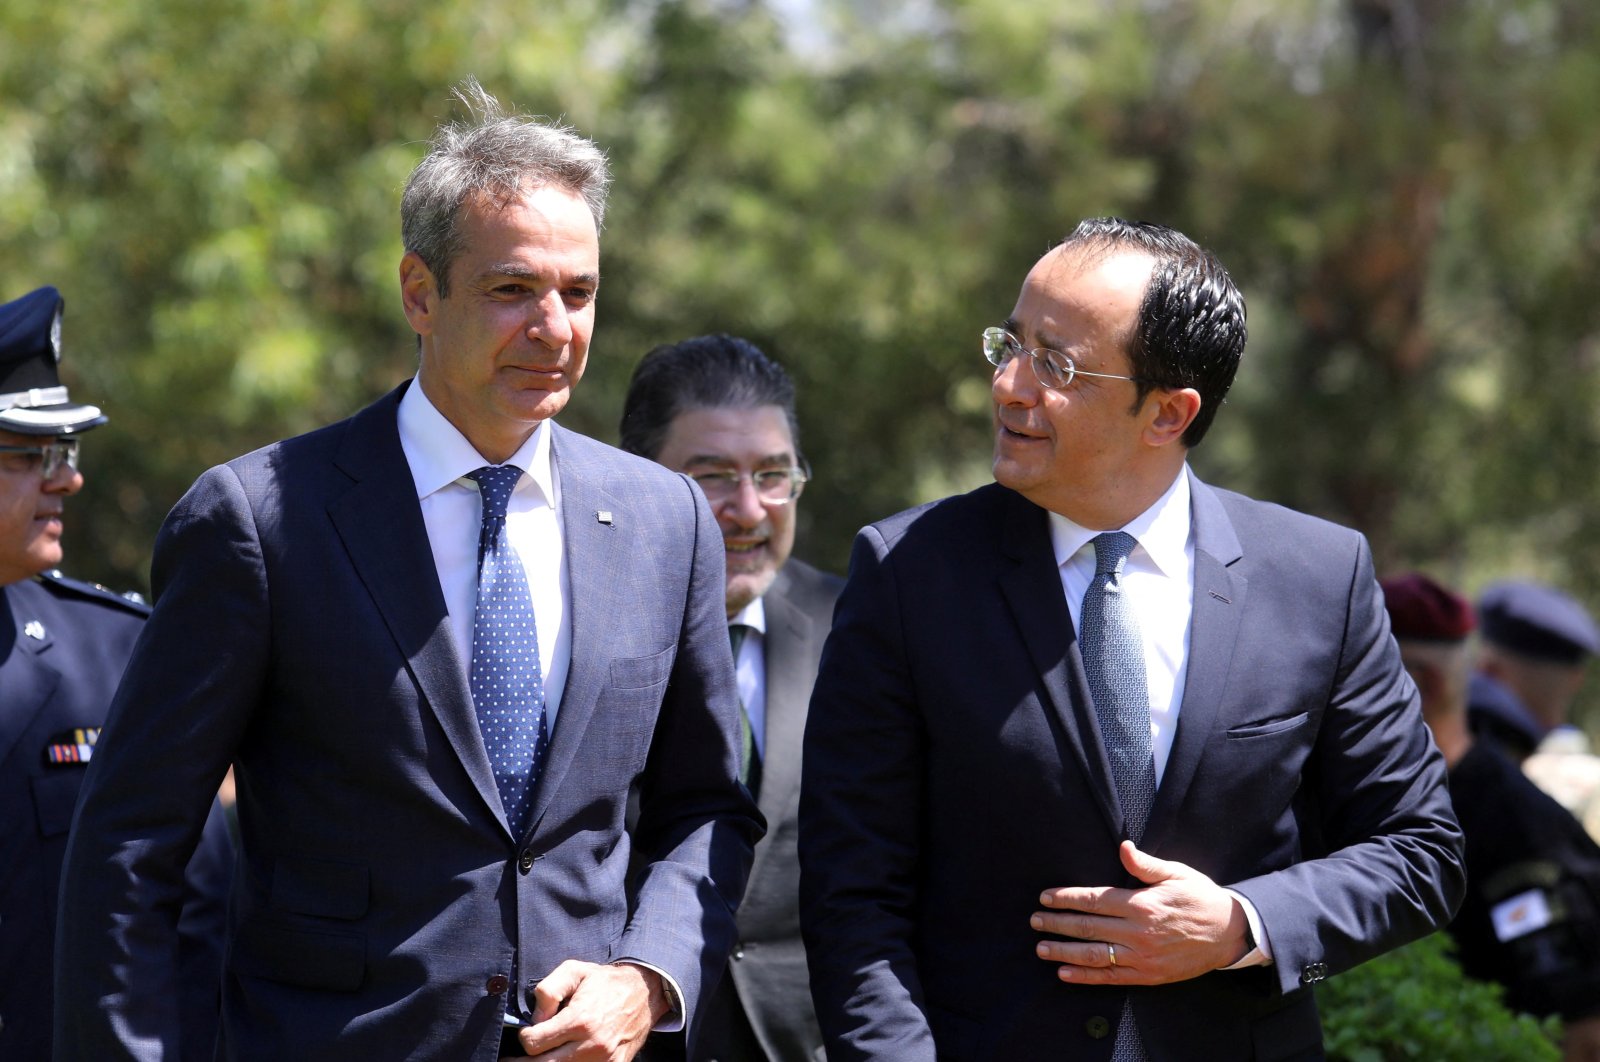 Greek Cypriot President Nikos Christodoulides (R) and Greek Prime Minister Kyriakos Mitsotakis attend a welcoming ceremony, in Lefkoşa (Nicosia), Cyprus, July 31, 2023. (Reuters Photo)